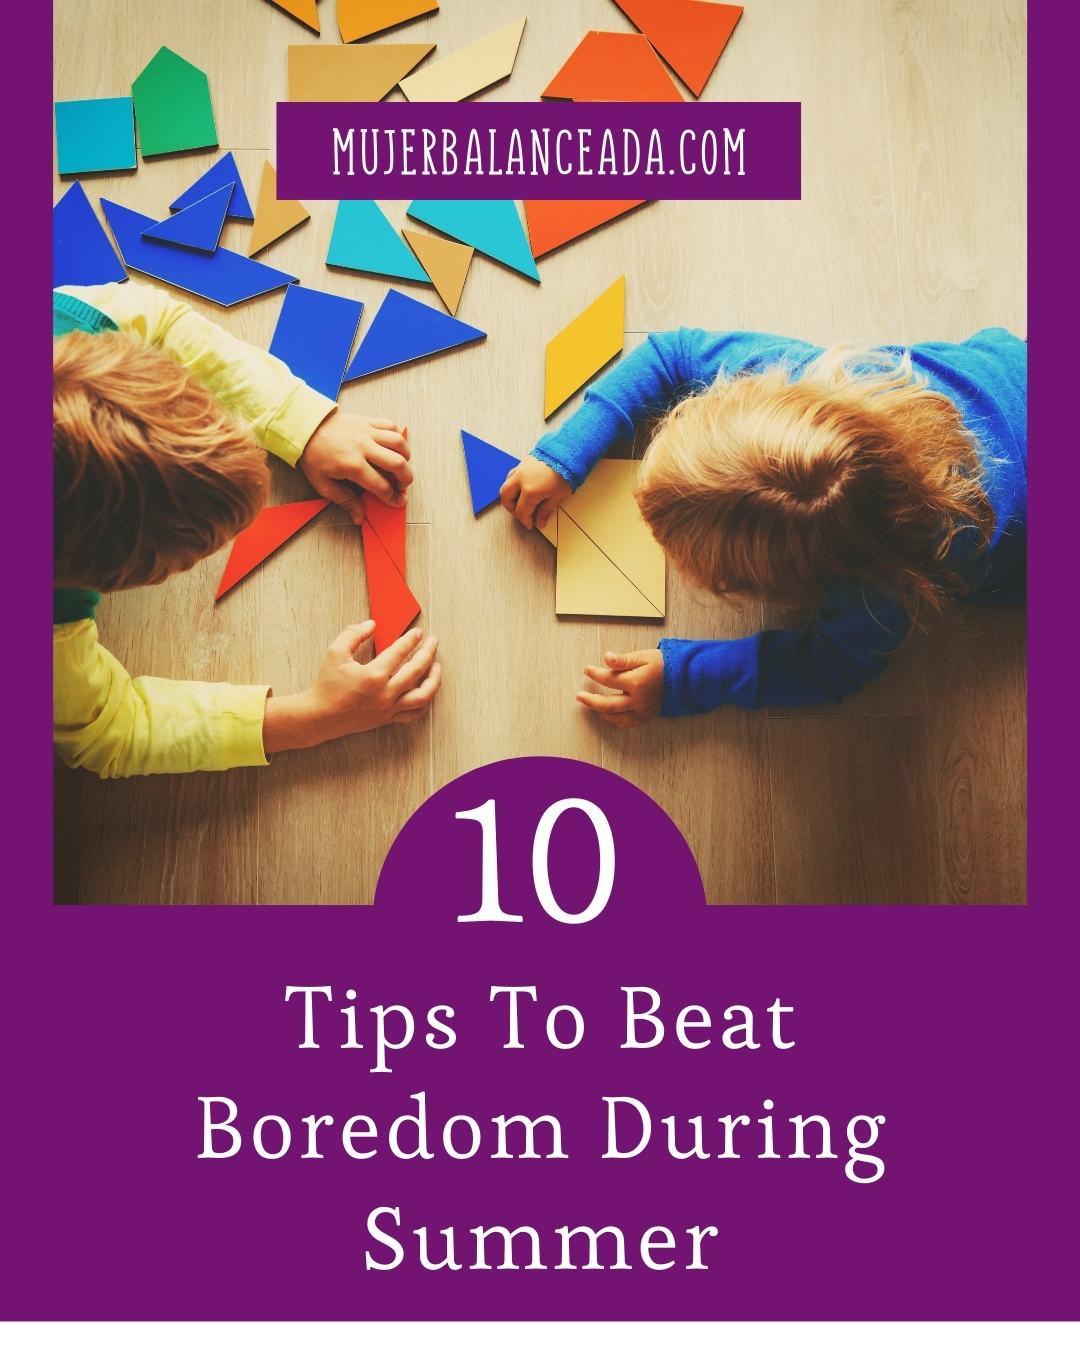 kids playing with building pieces - tips to beat boredom